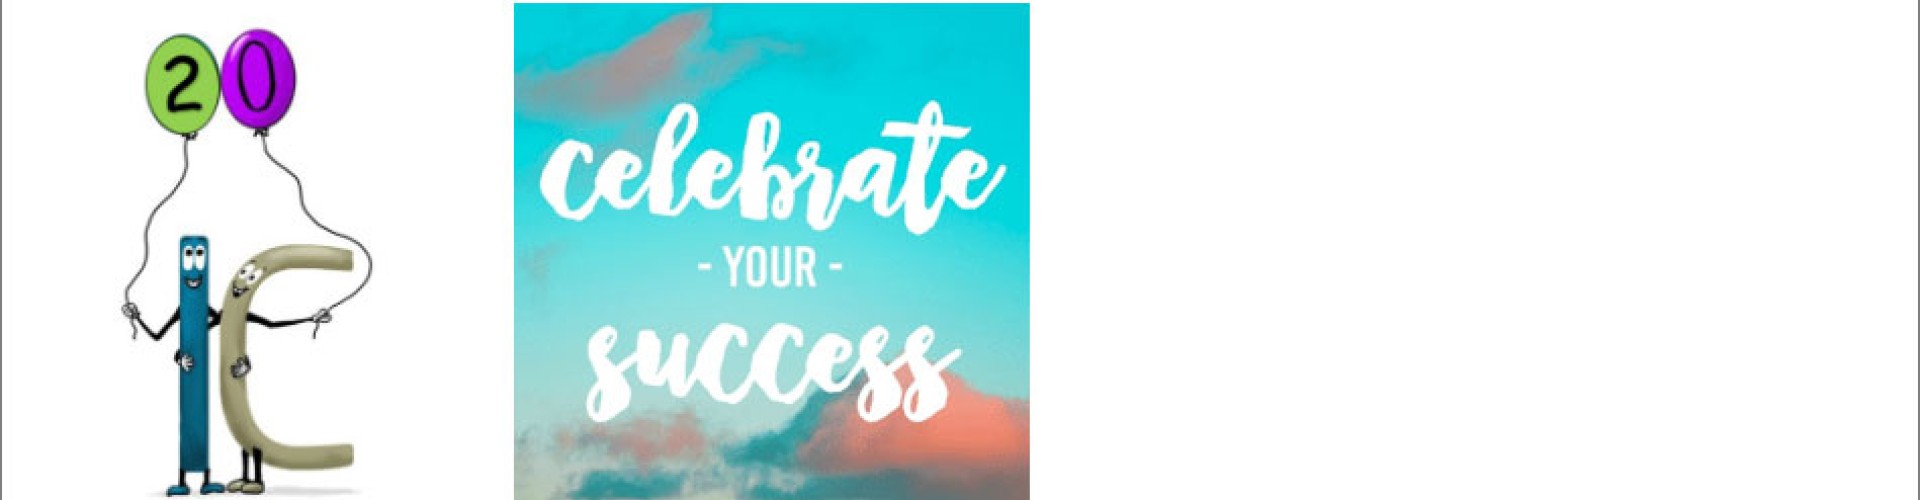 Image of Letters holding balloons next to a box with clouds and the words 'Celebrate Success'